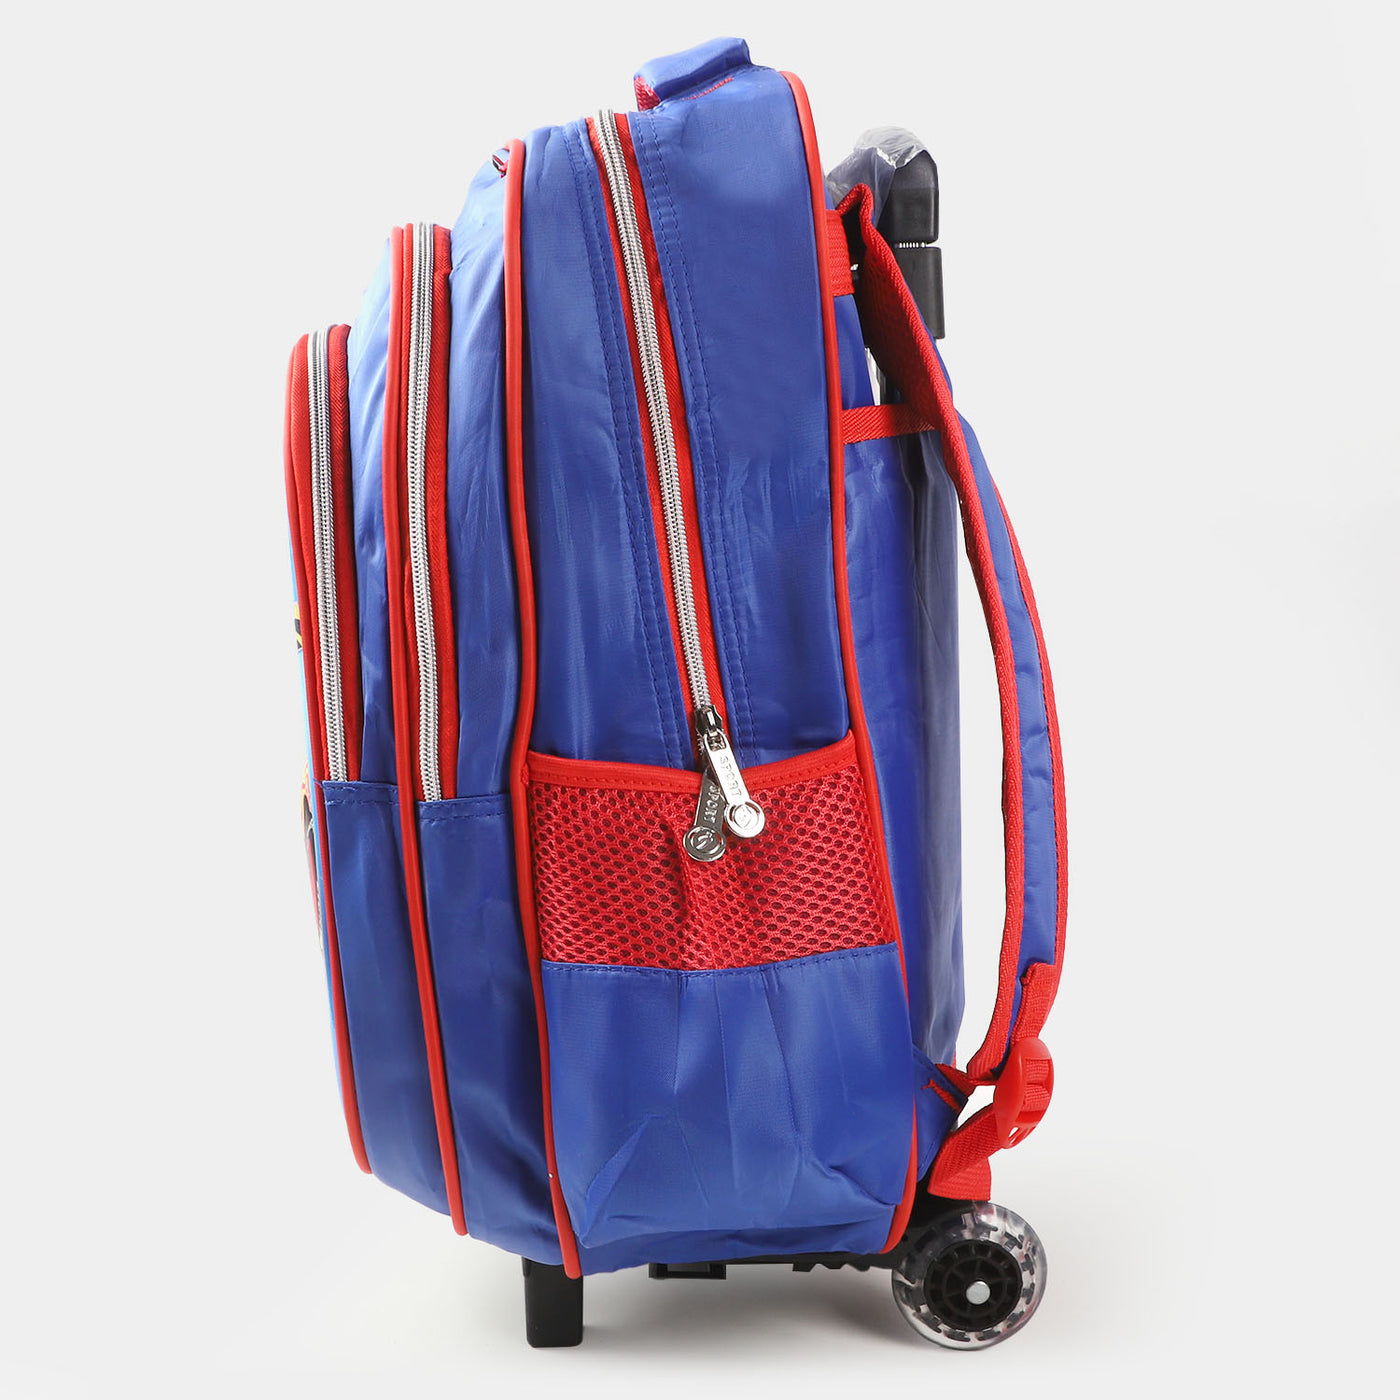 School Backpack With Trolley For Kids